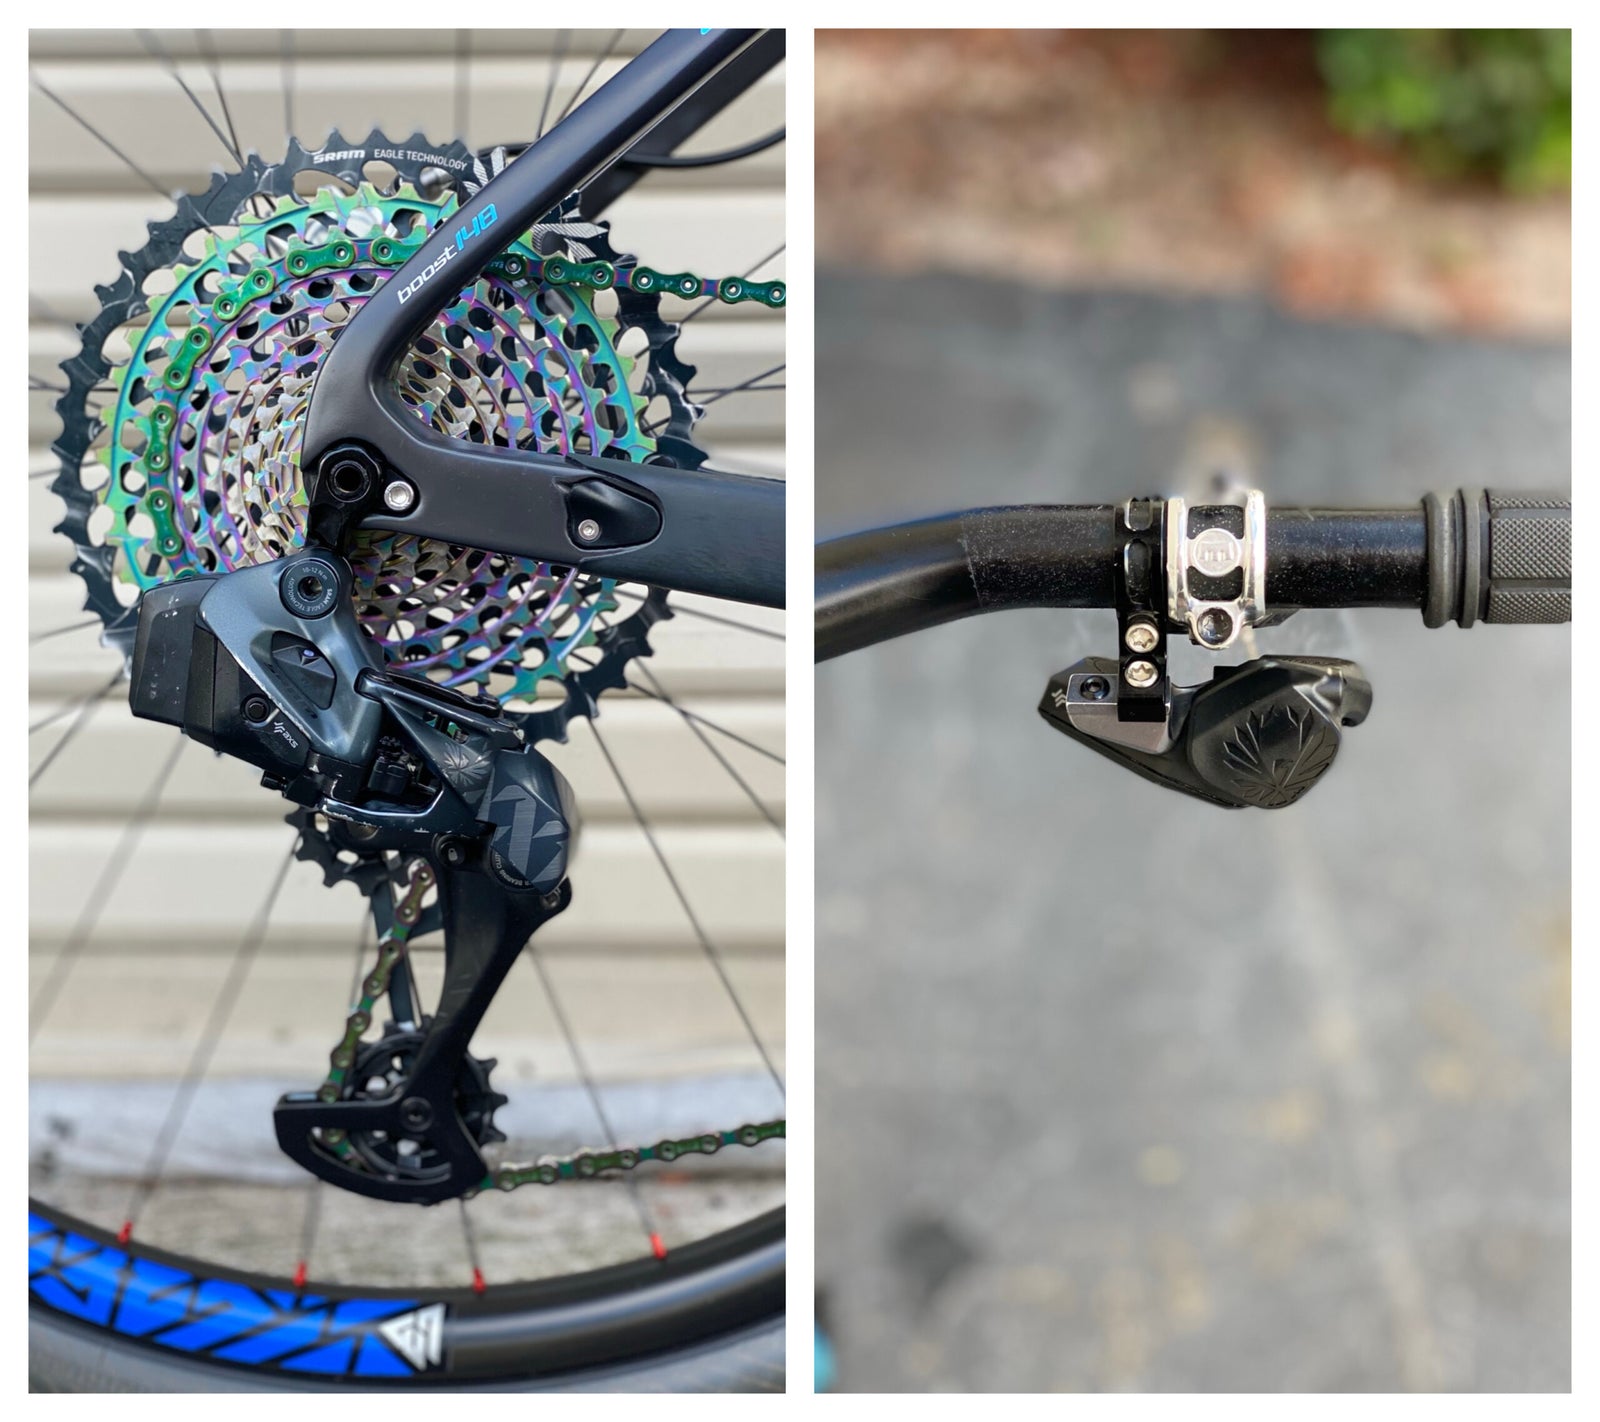 Electronic shifting: is it worth the extra cost over mechanical shifting?